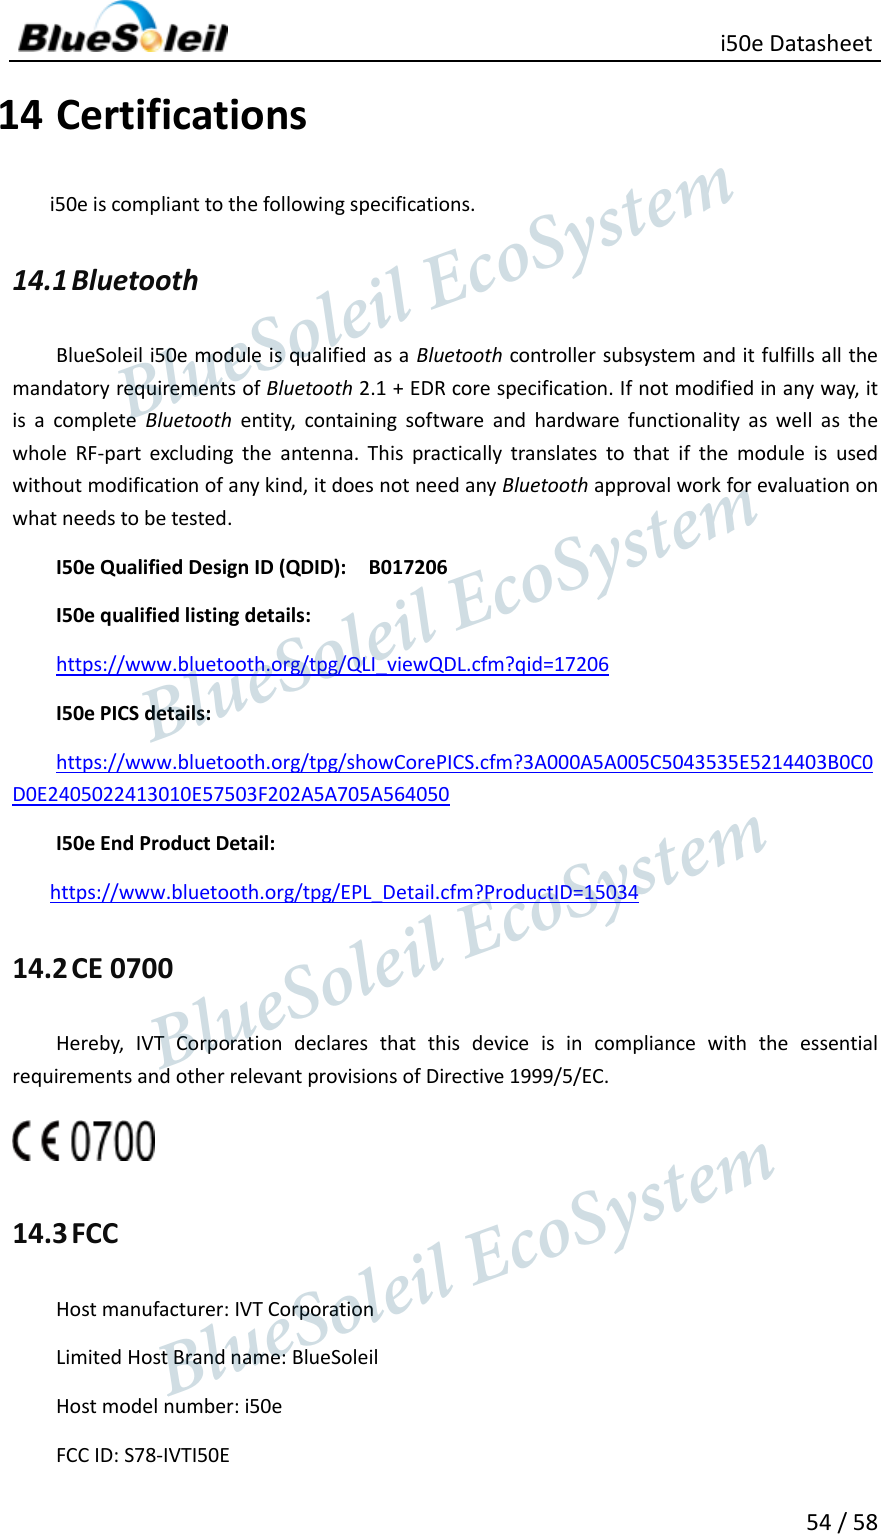                                                   i50e Datasheet 54 / 58 14 Certifications i50e is compliant to the following specifications. 14.1 Bluetooth BlueSoleil i50e module is qualified as a Bluetooth controller subsystem and it fulfills all the mandatory requirements of Bluetooth 2.1 + EDR core specification. If not modified in any way, it is  a  complete  Bluetooth  entity,  containing  software  and  hardware  functionality  as  well  as  the whole  RF-part  excluding  the  antenna.  This  practically  translates  to  that  if  the  module  is  used without modification of any kind, it does not need any Bluetooth approval work for evaluation on what needs to be tested. I50e Qualified Design ID (QDID):    B017206   I50e qualified listing details: https://www.bluetooth.org/tpg/QLI_viewQDL.cfm?qid=17206 I50e PICS details: https://www.bluetooth.org/tpg/showCorePICS.cfm?3A000A5A005C5043535E5214403B0C0D0E2405022413010E57503F202A5A705A564050 I50e End Product Detail: https://www.bluetooth.org/tpg/EPL_Detail.cfm?ProductID=15034 14.2 CE 0700 Hereby,  IVT  Corporation  declares  that  this  device  is  in  compliance  with  the  essential requirements and other relevant provisions of Directive 1999/5/EC.  14.3 FCC Host manufacturer: IVT Corporation Limited Host Brand name: BlueSoleil Host model number: i50e FCC ID: S78-IVTI50E                  BlueSoleil EcoSystem            BlueSoleil EcoSystem      BlueSoleil EcoSystemBlueSoleil EcoSystem